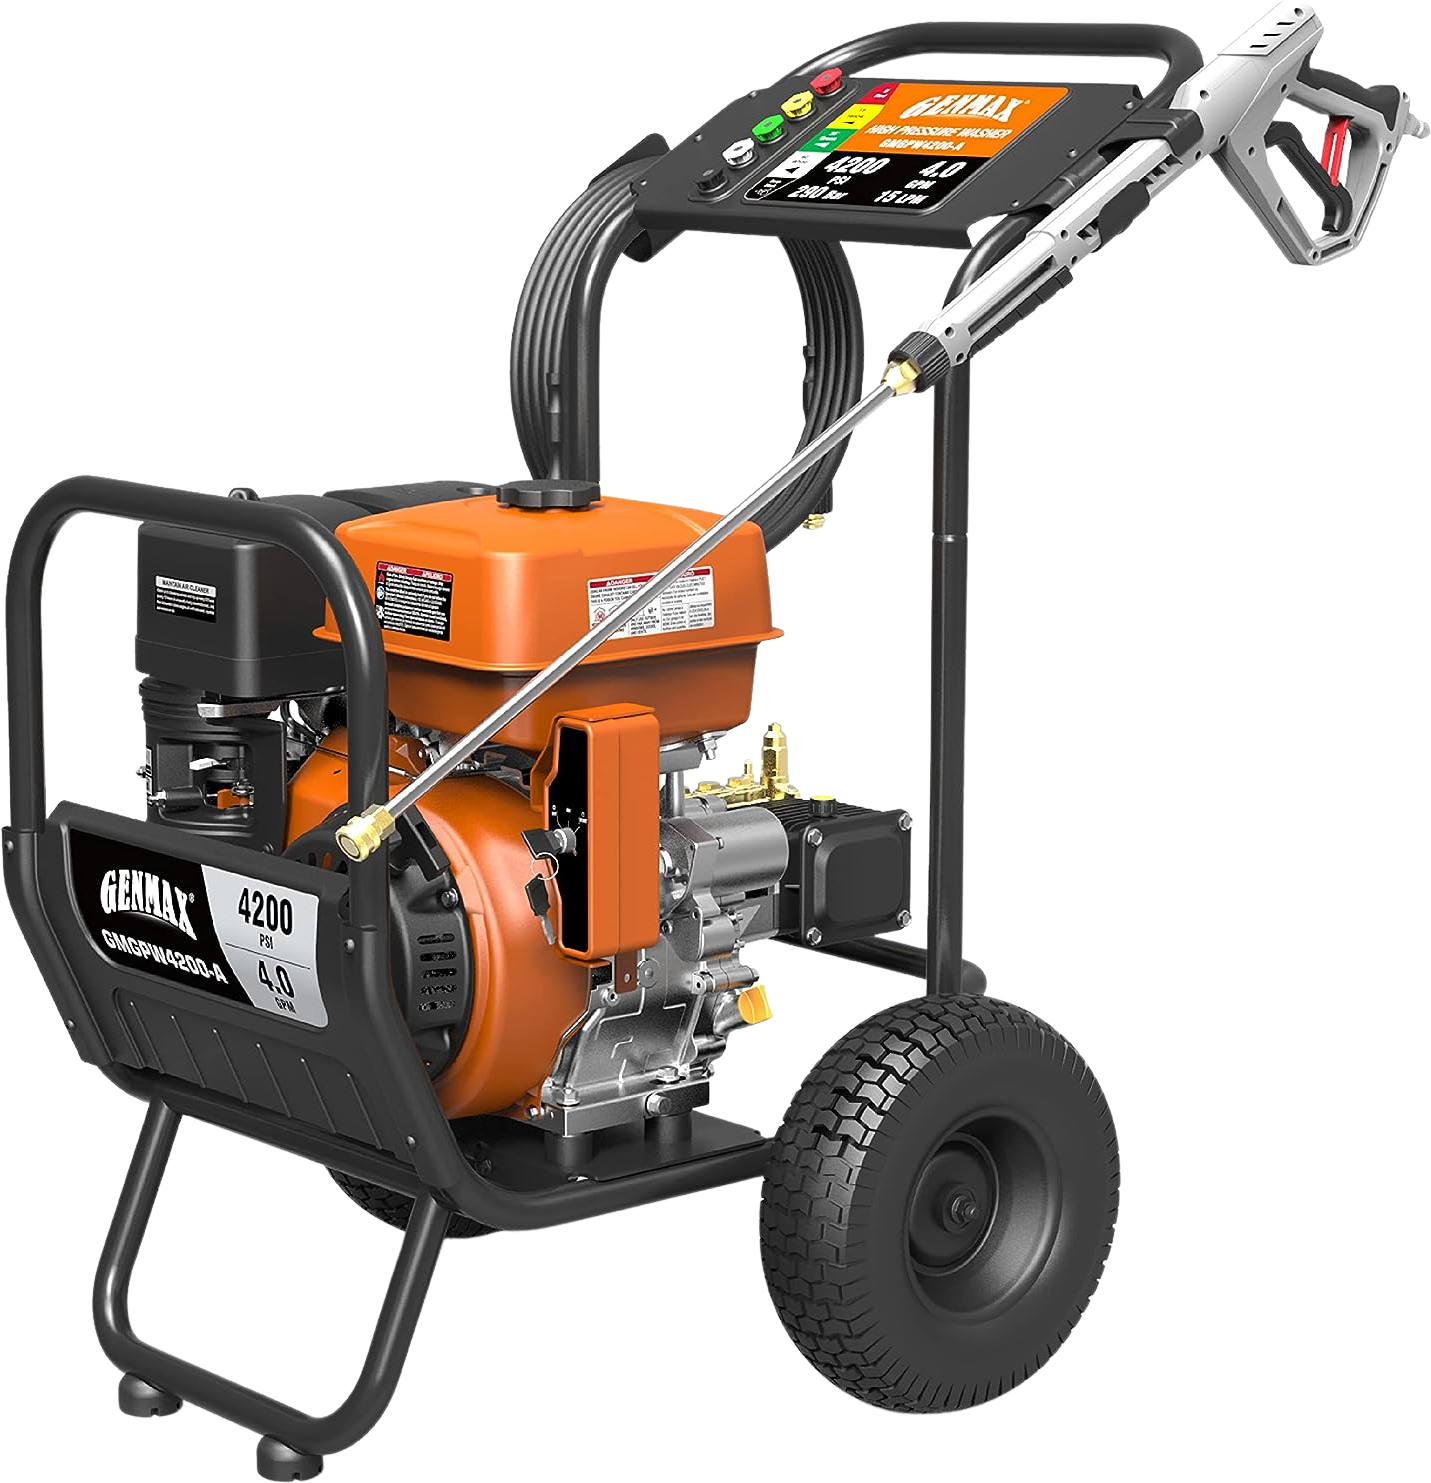 GENMAX, GENMAX GMGPW4200-A 4200 PSI and 4 GPM Gas Pressure Washer with Electric Start New